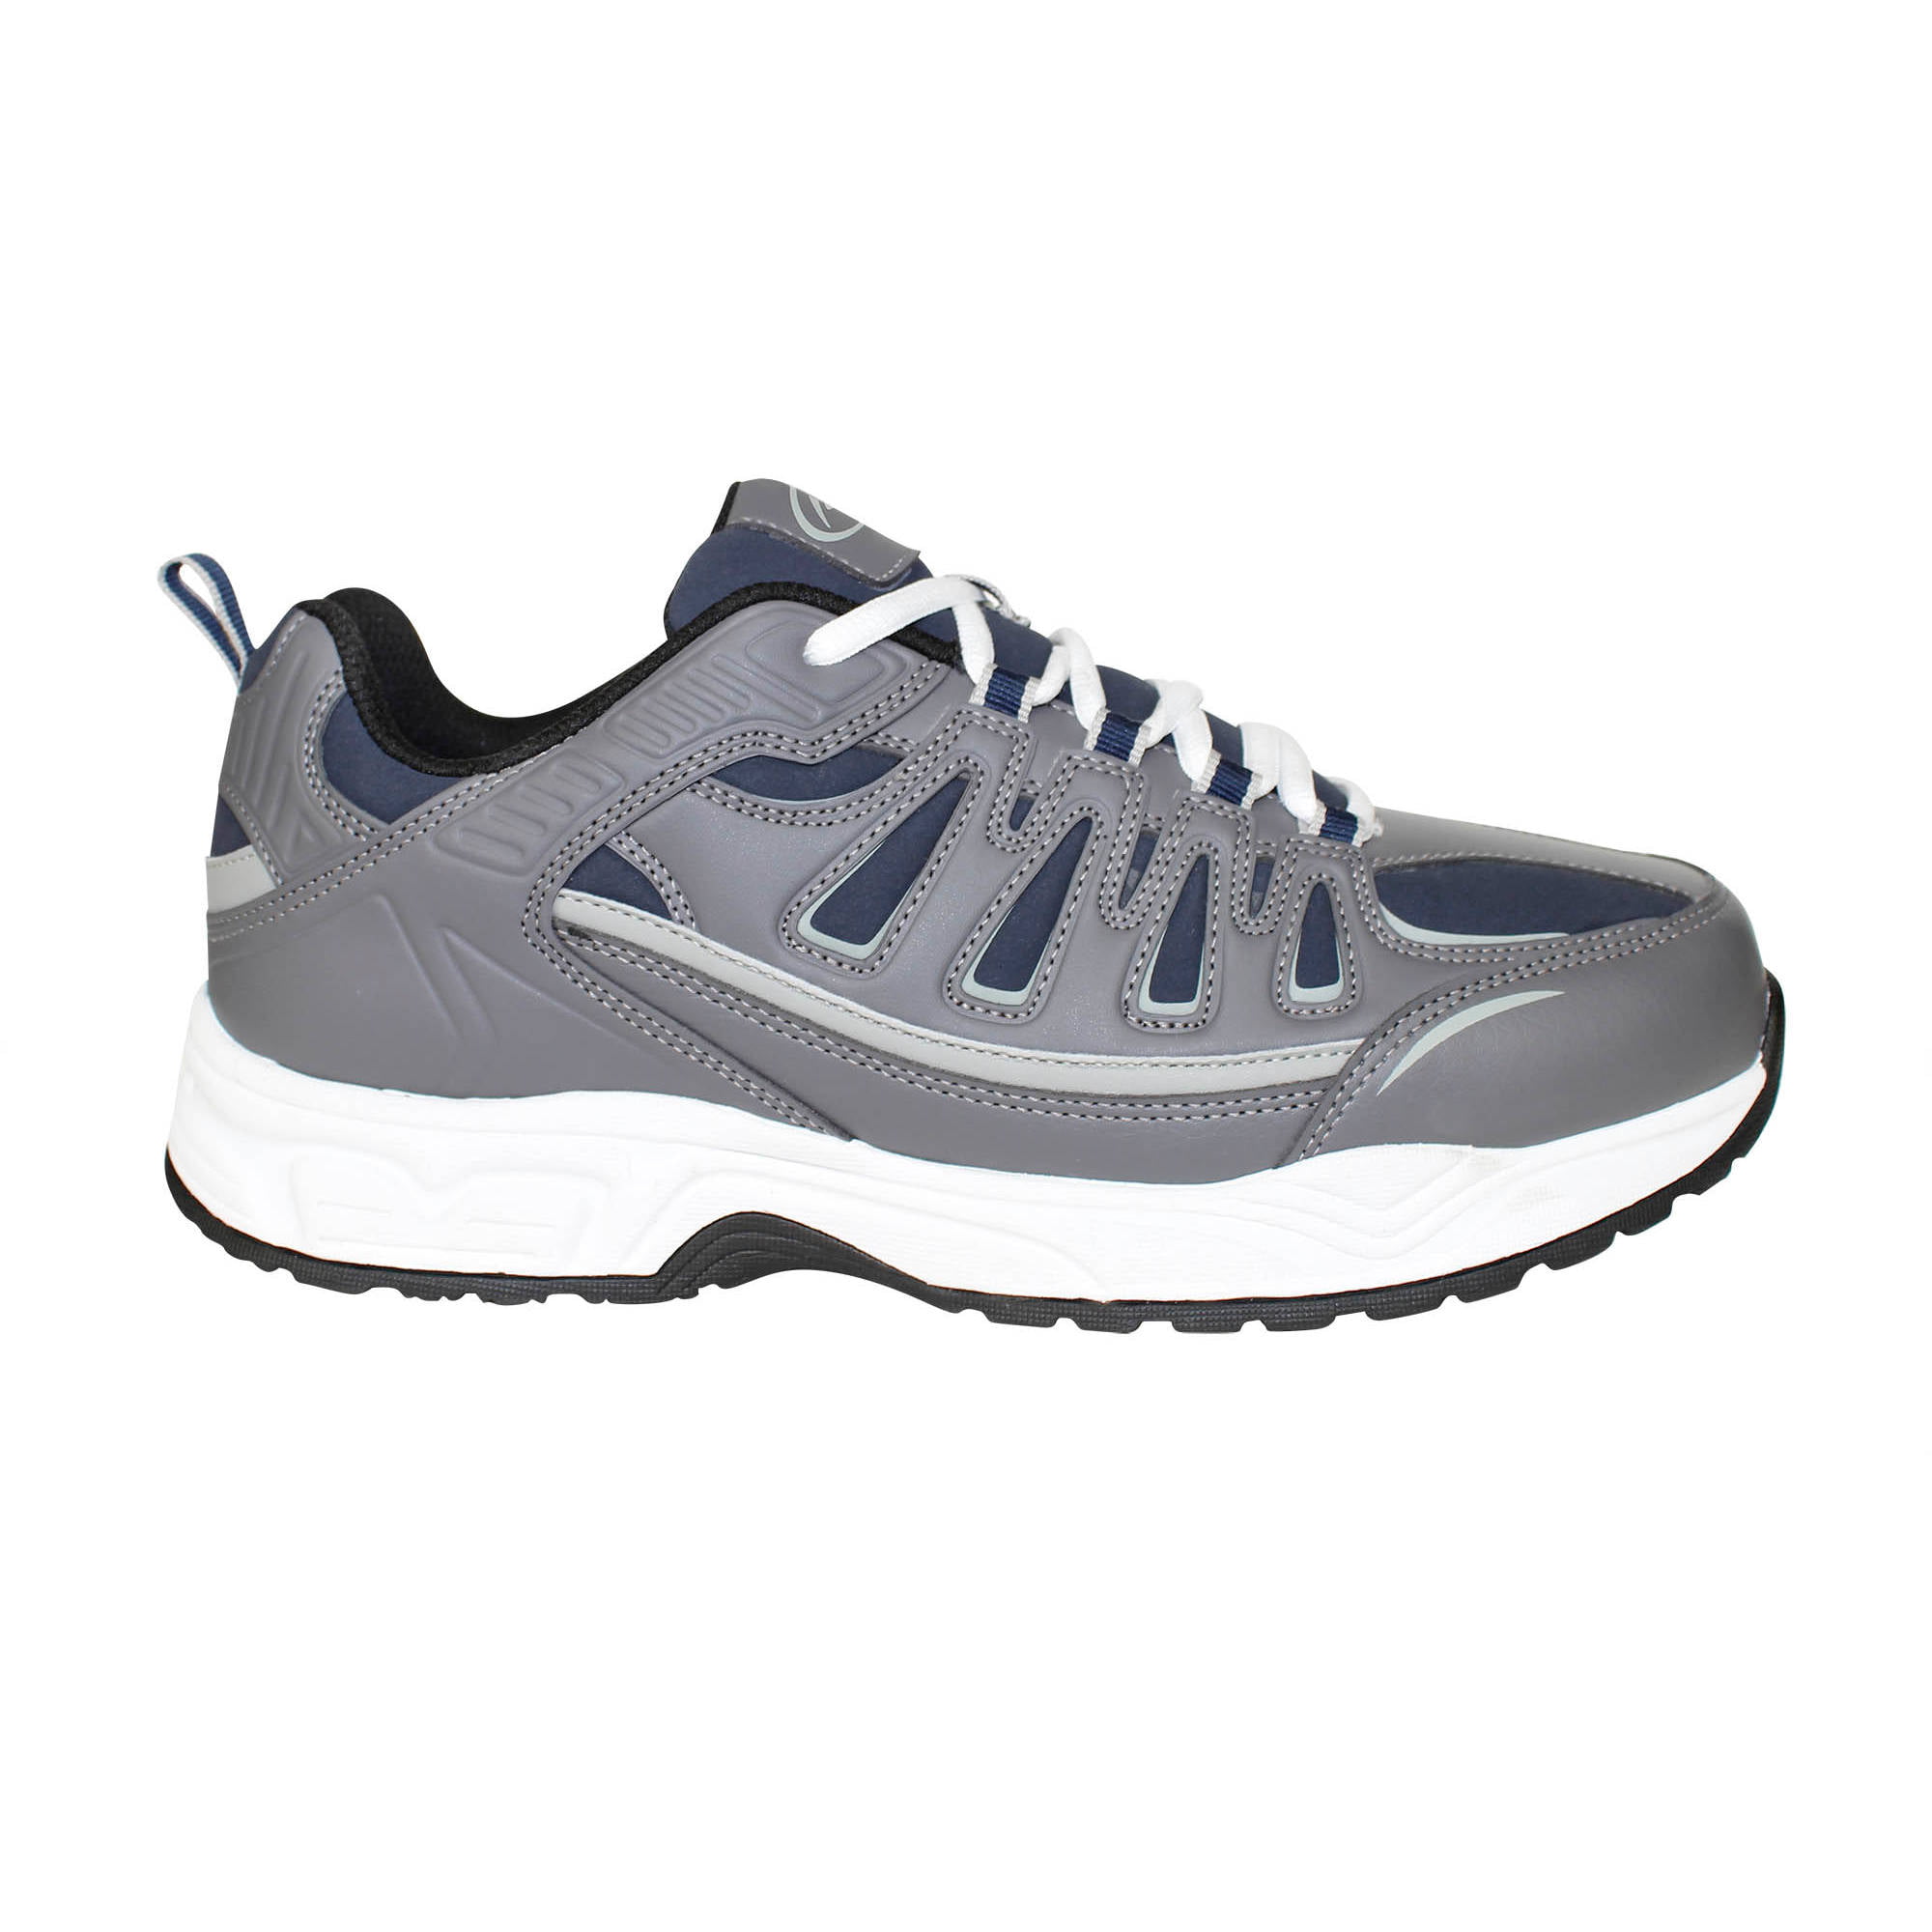 mens wide athletic shoes